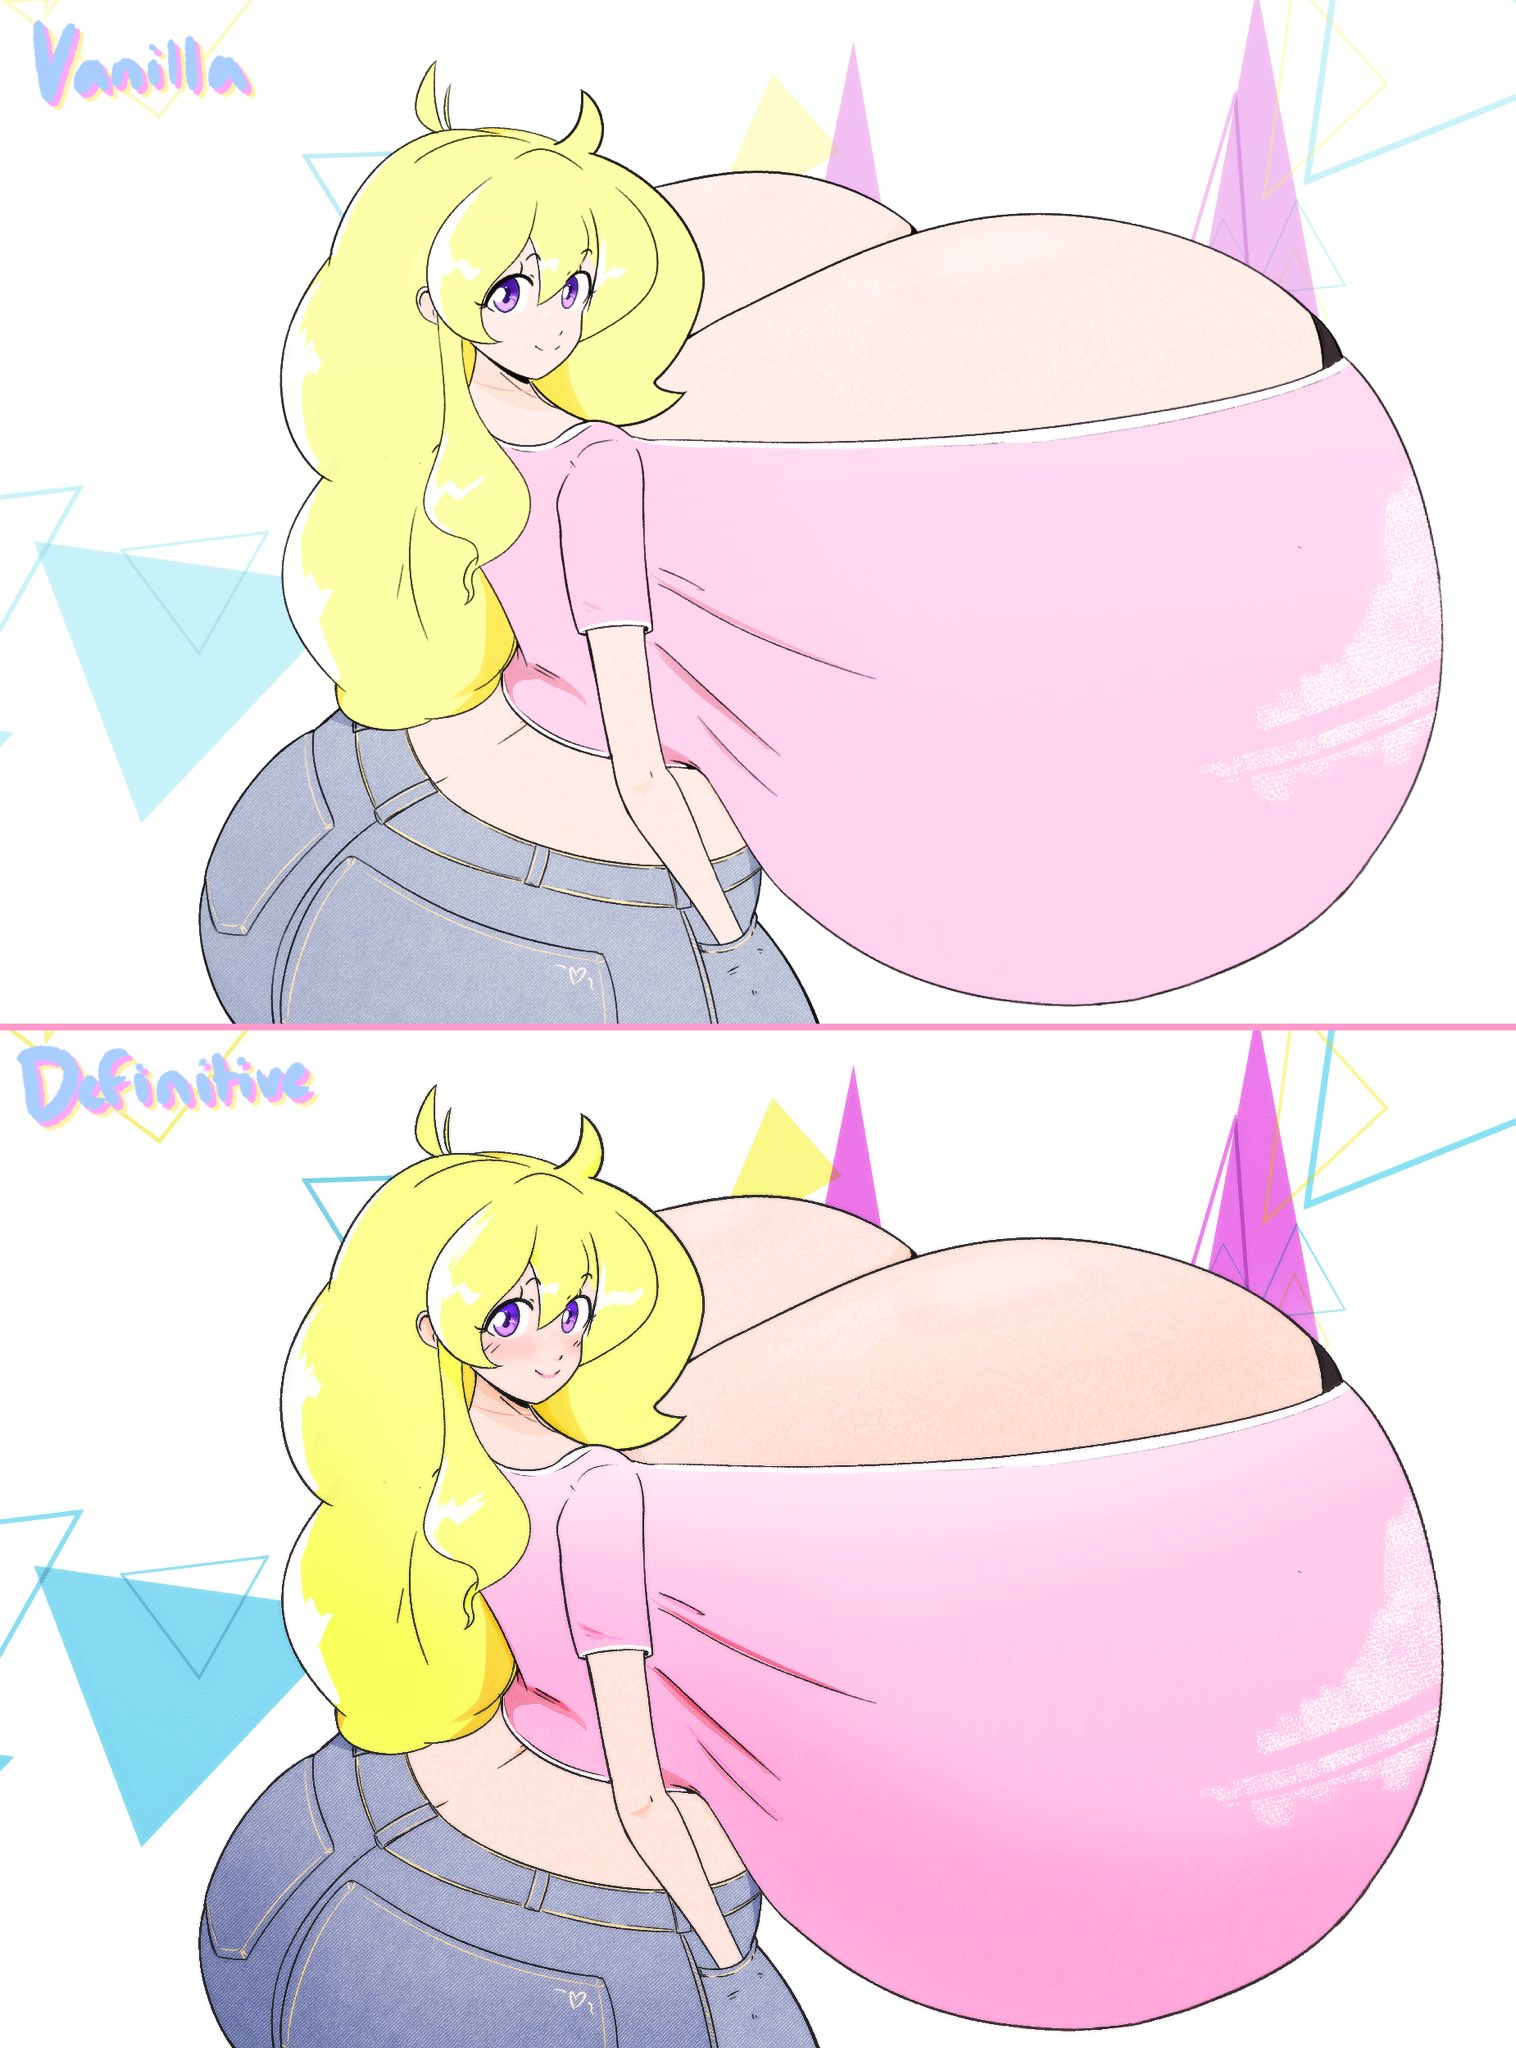 Cake 🍰 on X: RT @RileyMooreDoodl: BAT: Definitive Edition Featuring Cassie  @theycallhimcake t.cokcwLh5ANbD  X